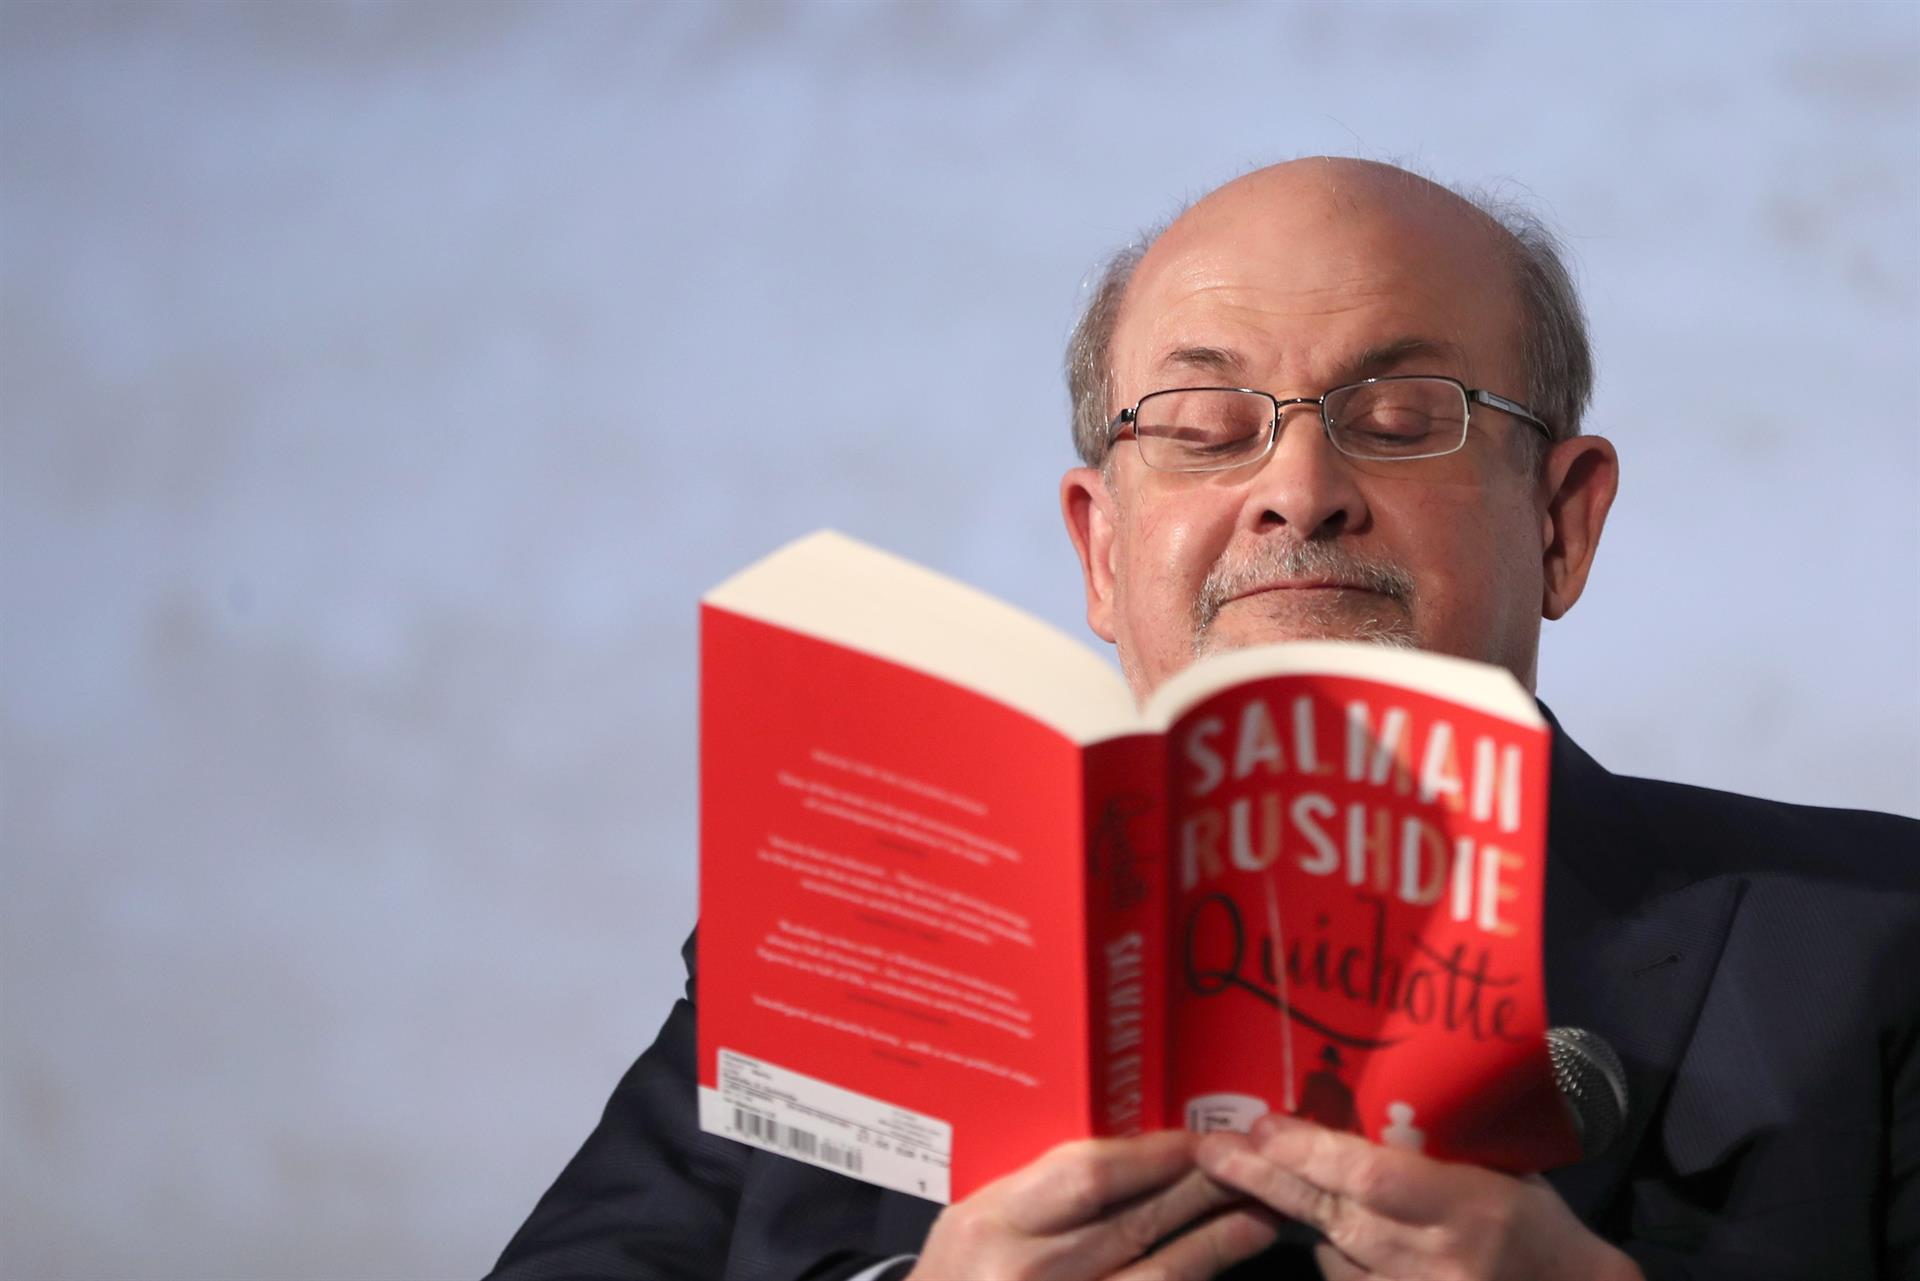 Salman Rushdie is still "in critical condition" but without a respirator, according to his son